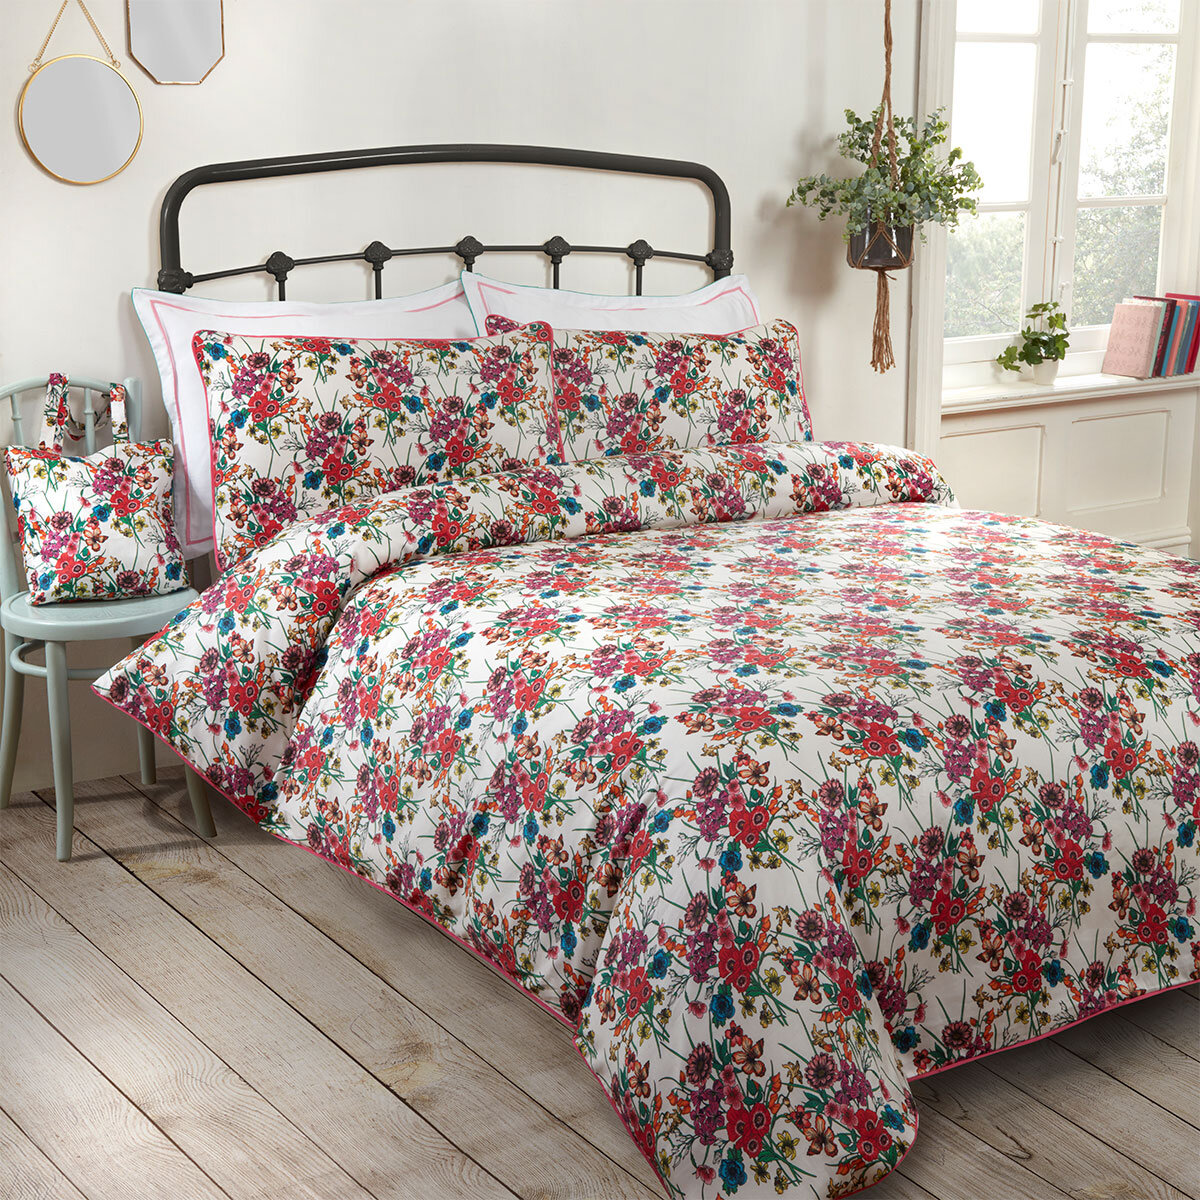 Tabitha Webb White Floral Cotton 3 Piece Bed Set in 4 Sizes